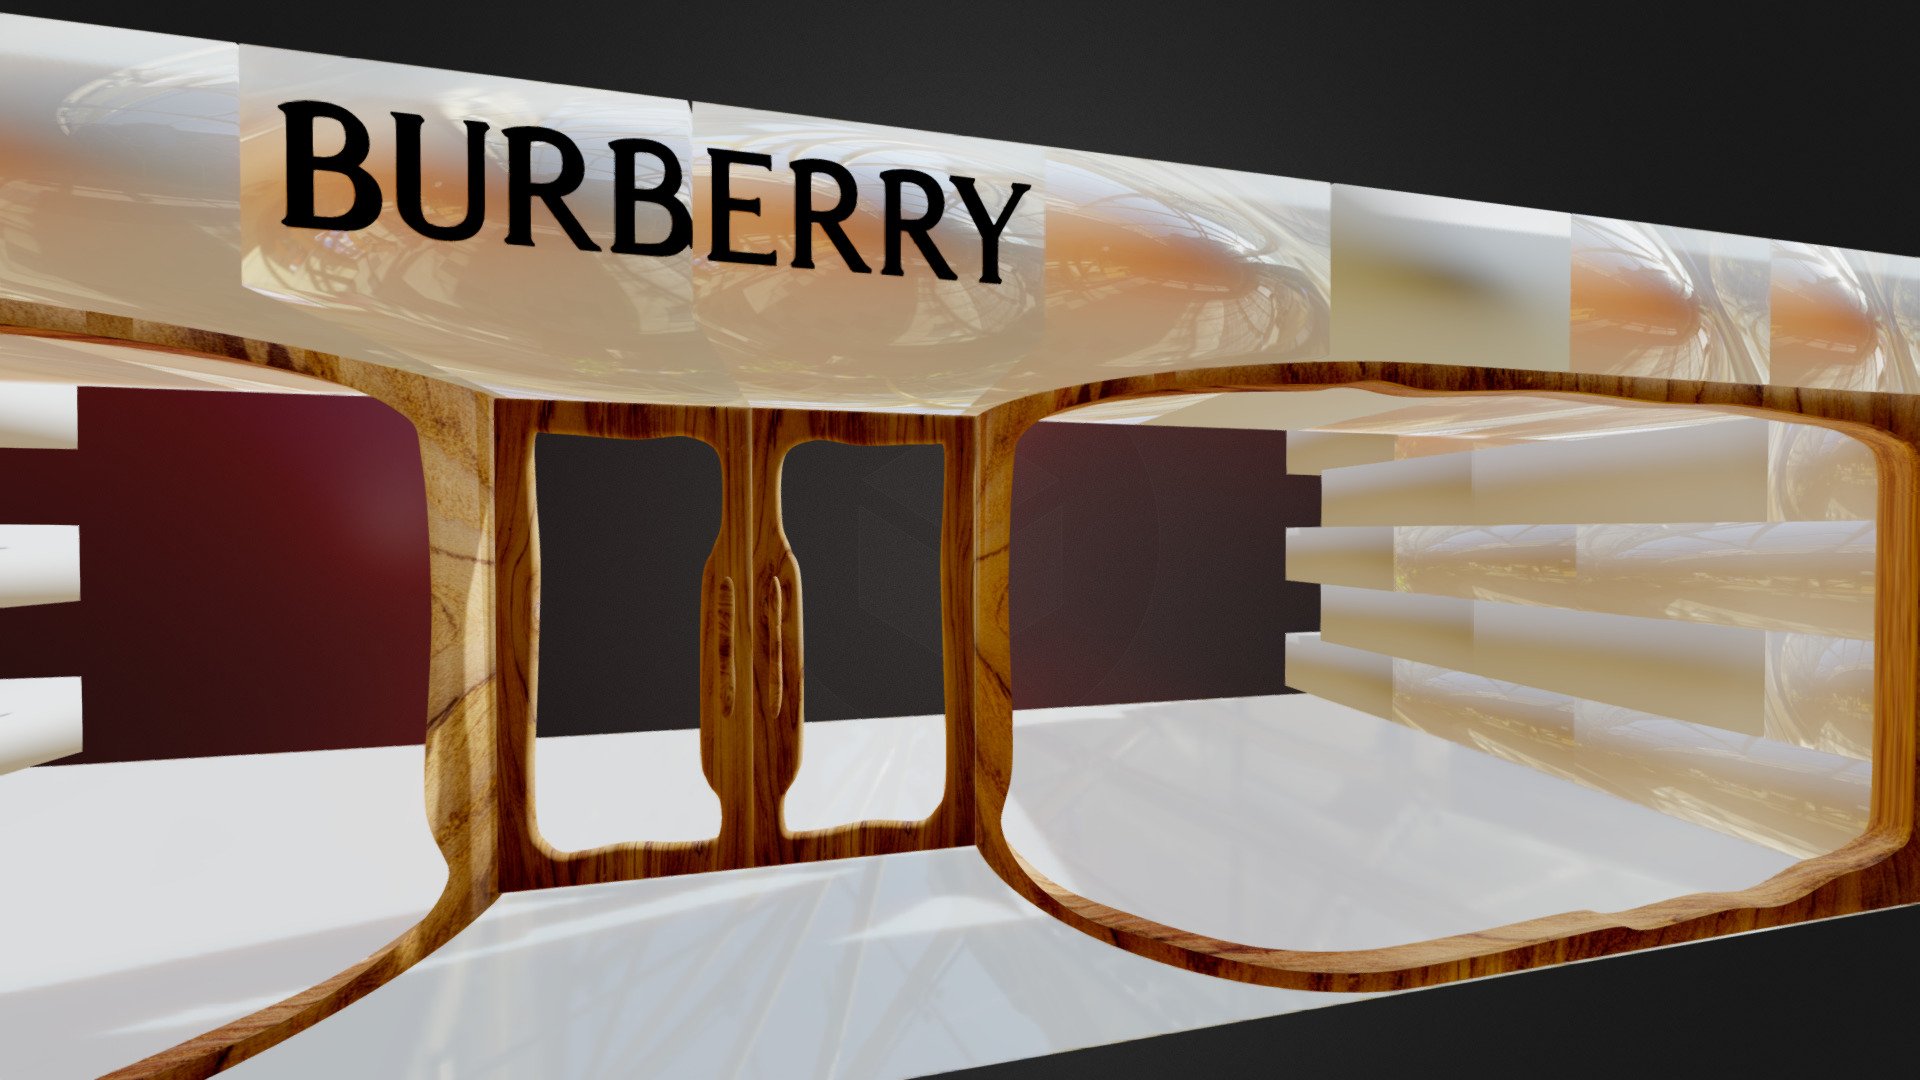 Burberry New Store Concept facade - Download Free 3D model by 